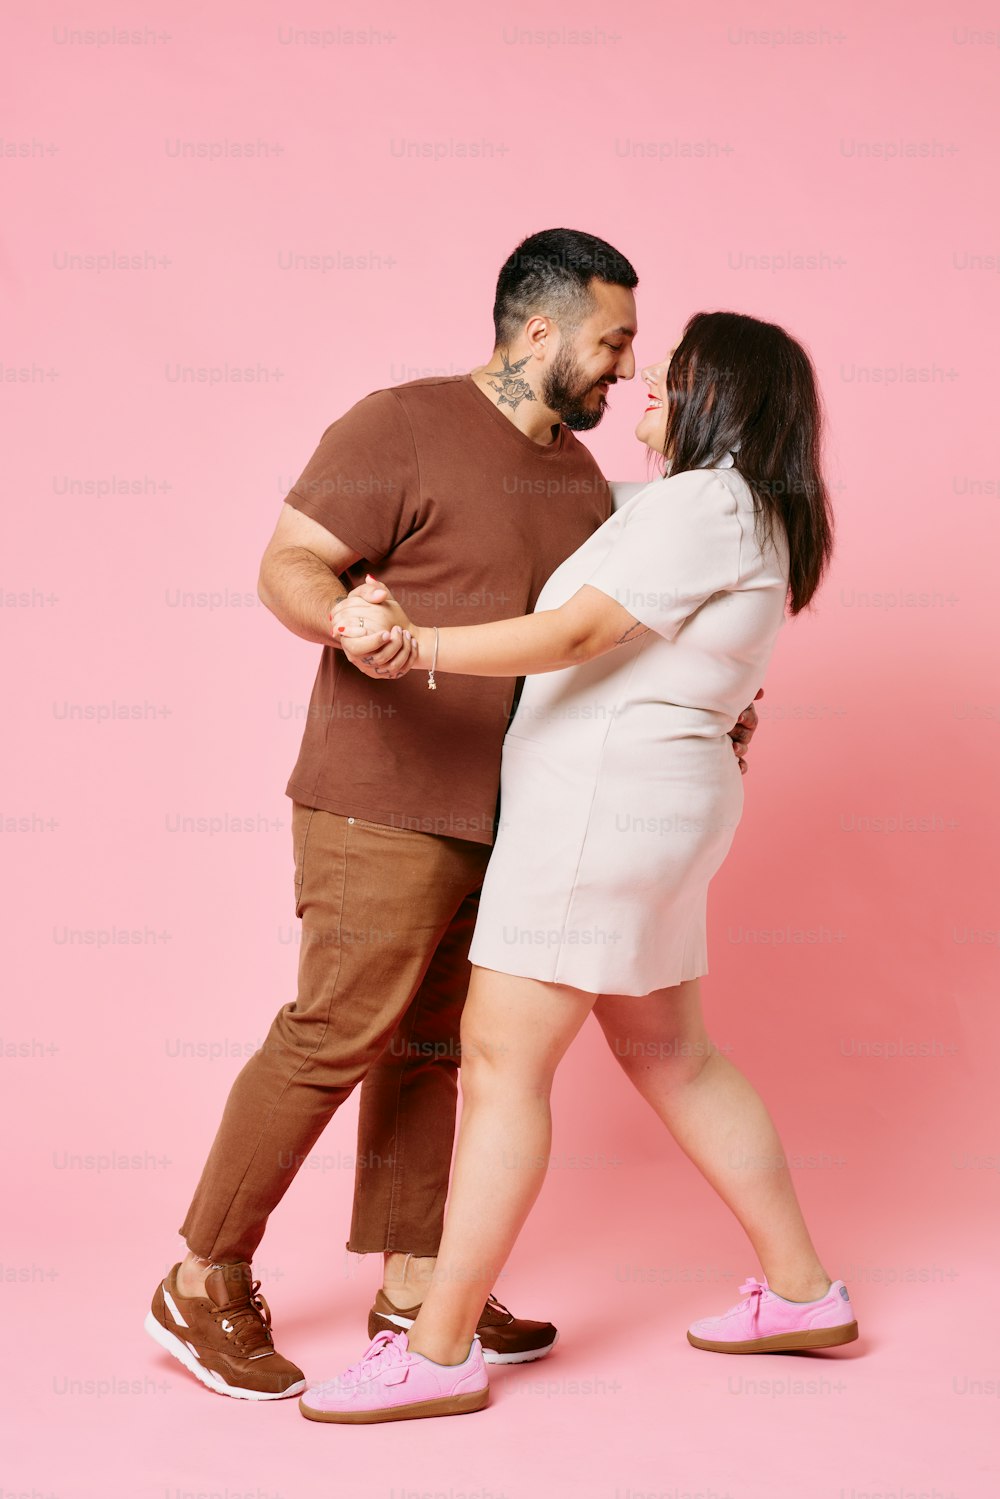 a man and a woman dancing together on a pink background